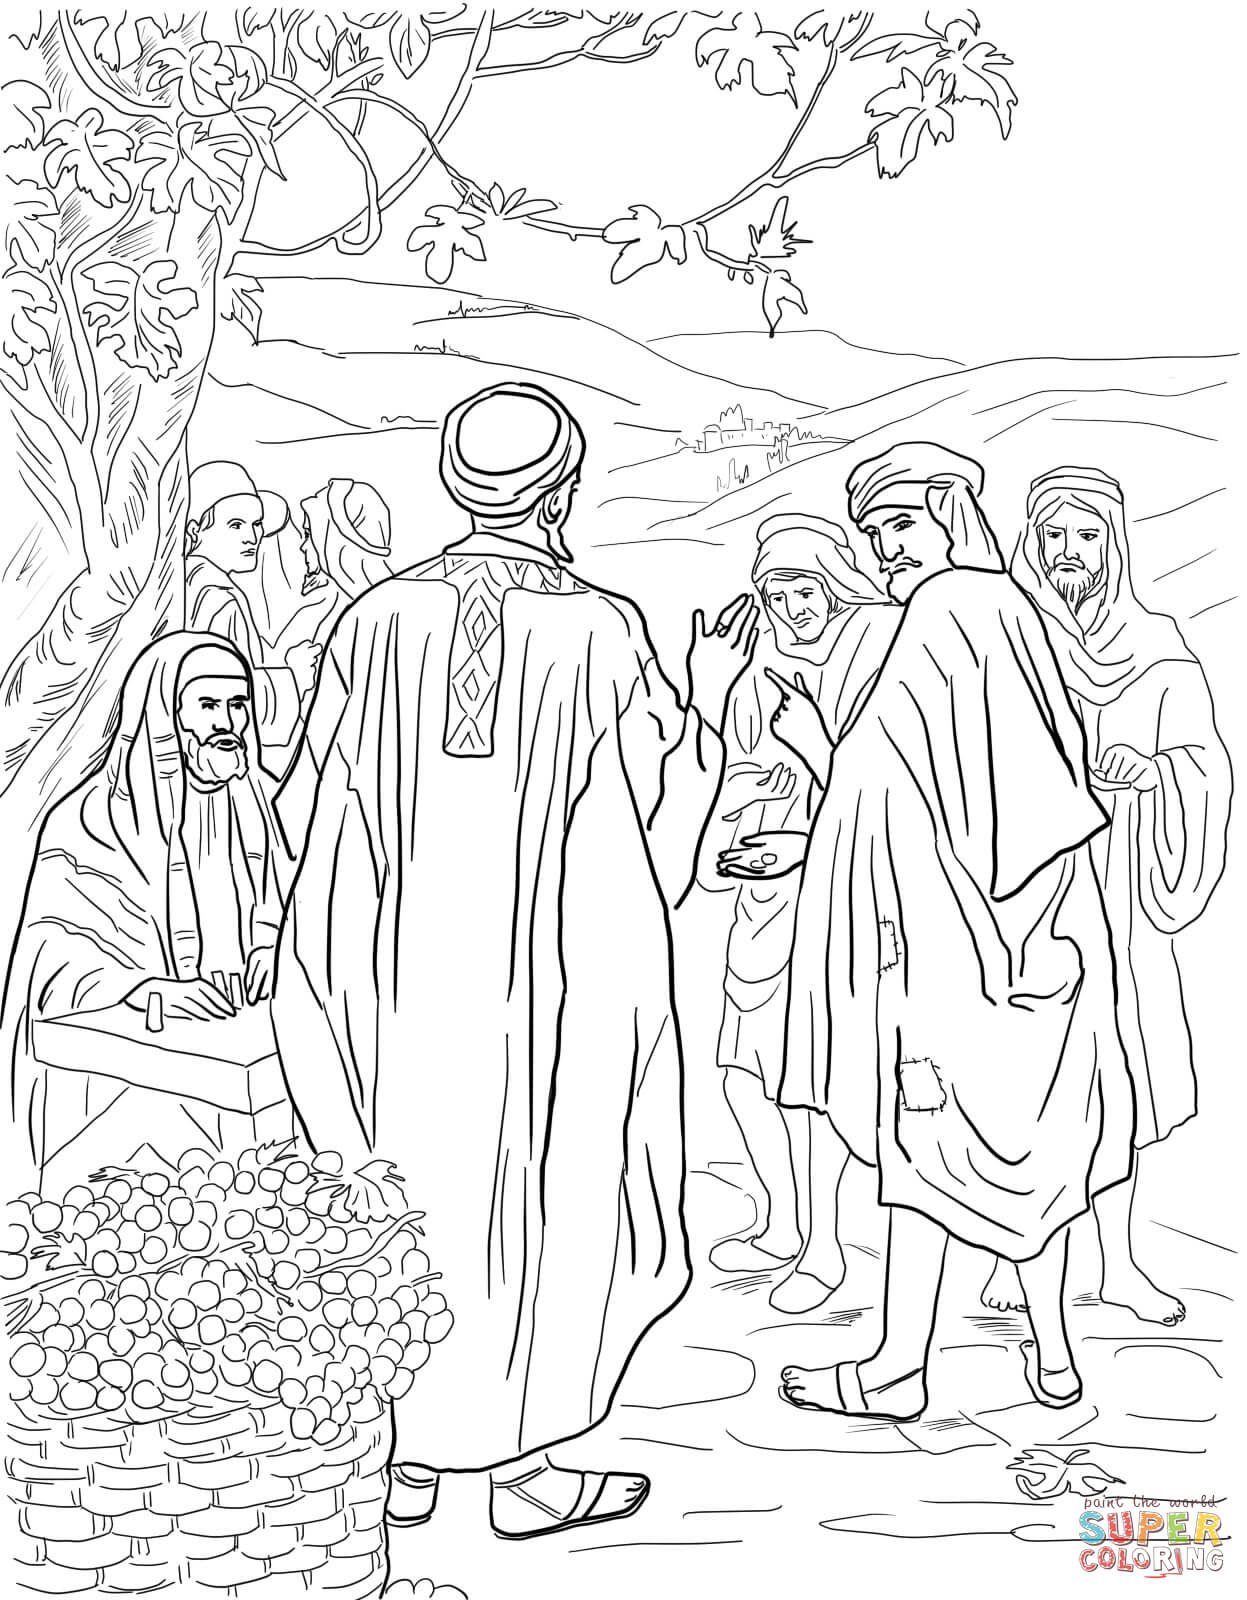 Parable of the workers in the vineyard coloring page free printable coloring pages